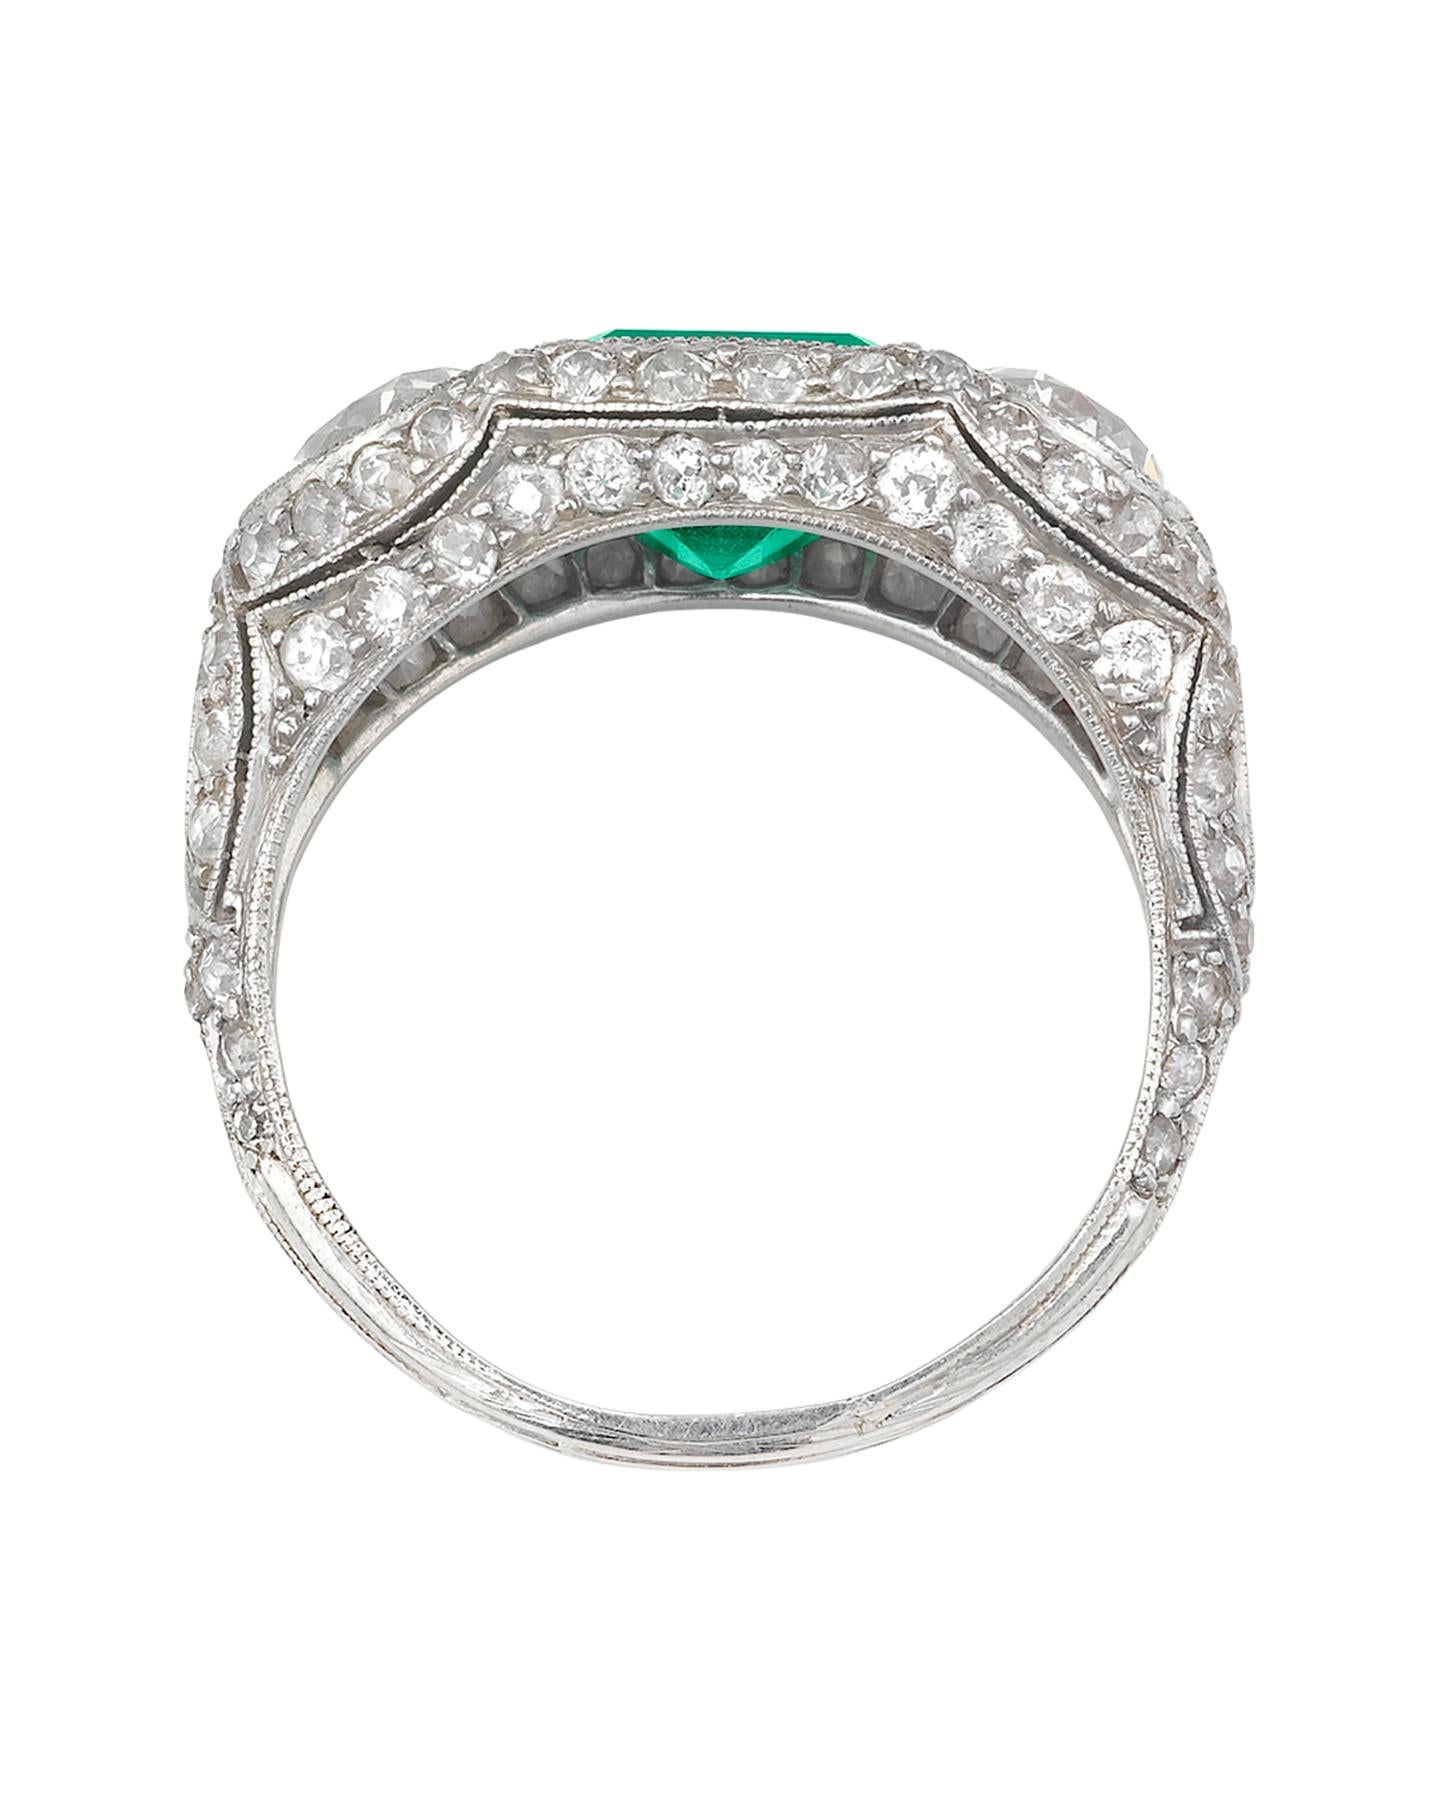 This striking emerald and diamond ring captures the timeless sophistication of the Art Deco style. Mounted in an ornate platinum dome setting, a magnificent emerald, weighing approximately 2.00 carats, is joined by two spectacular European cut